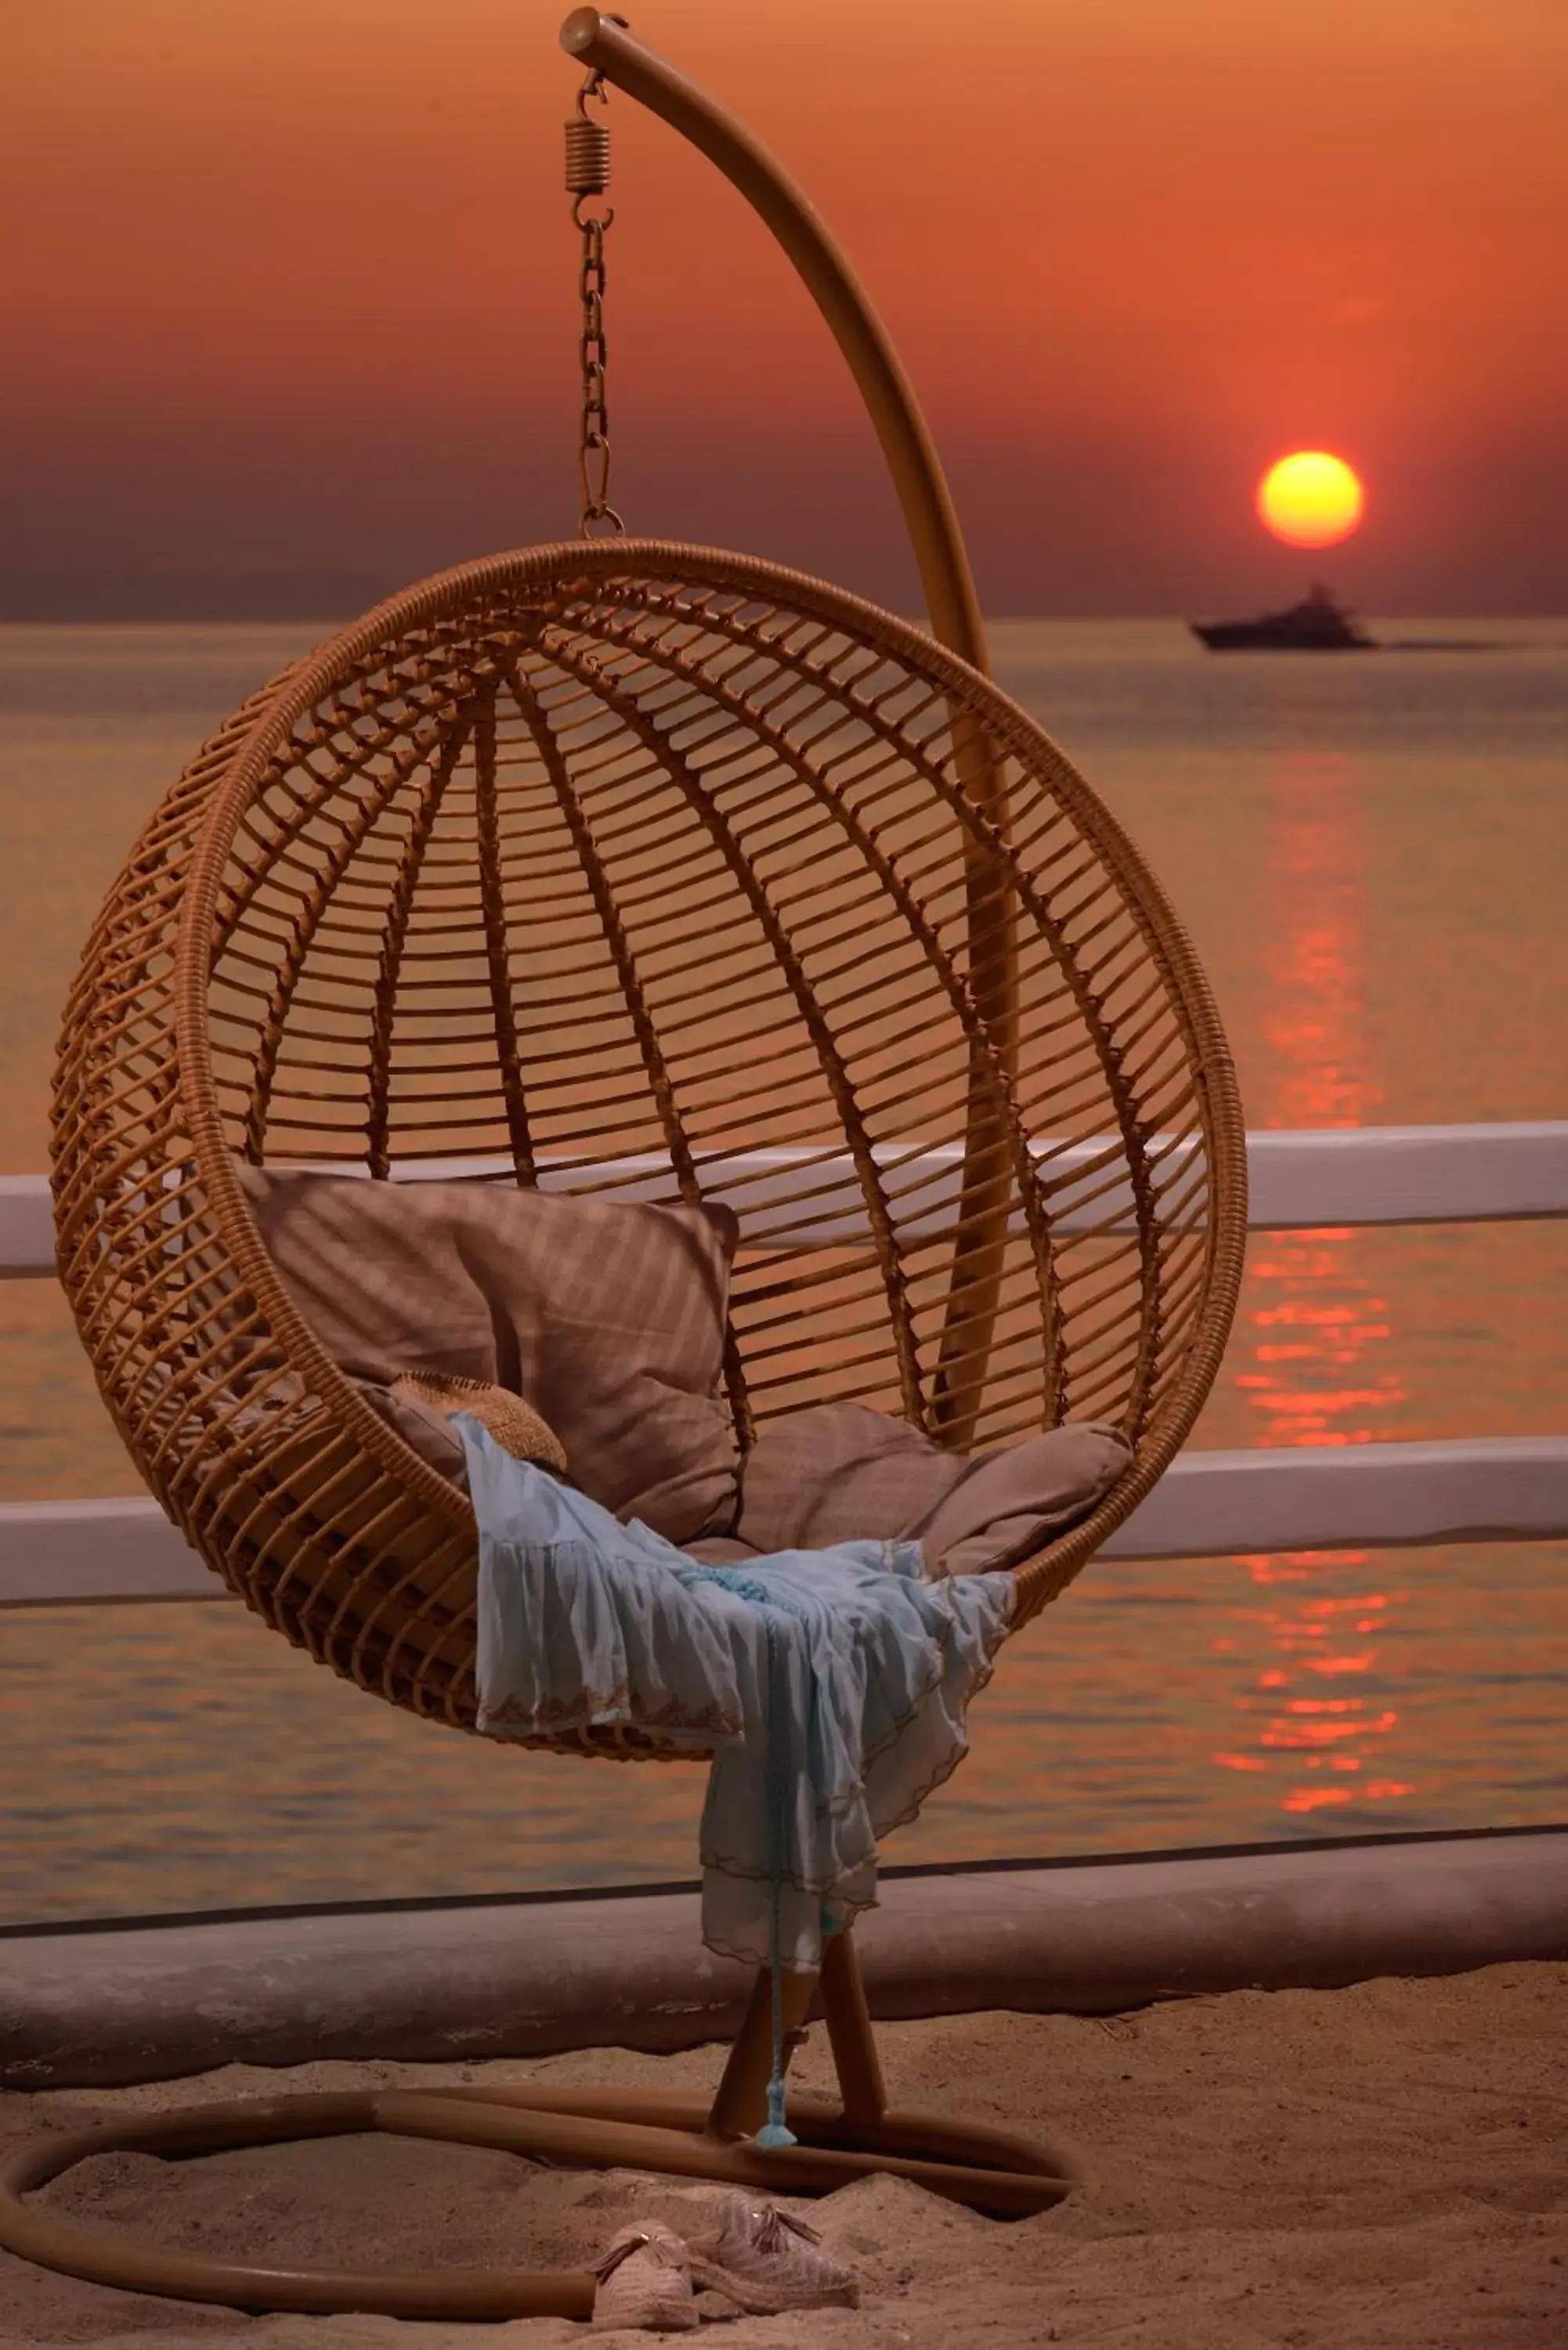 Sunset in Anax Resort and Spa